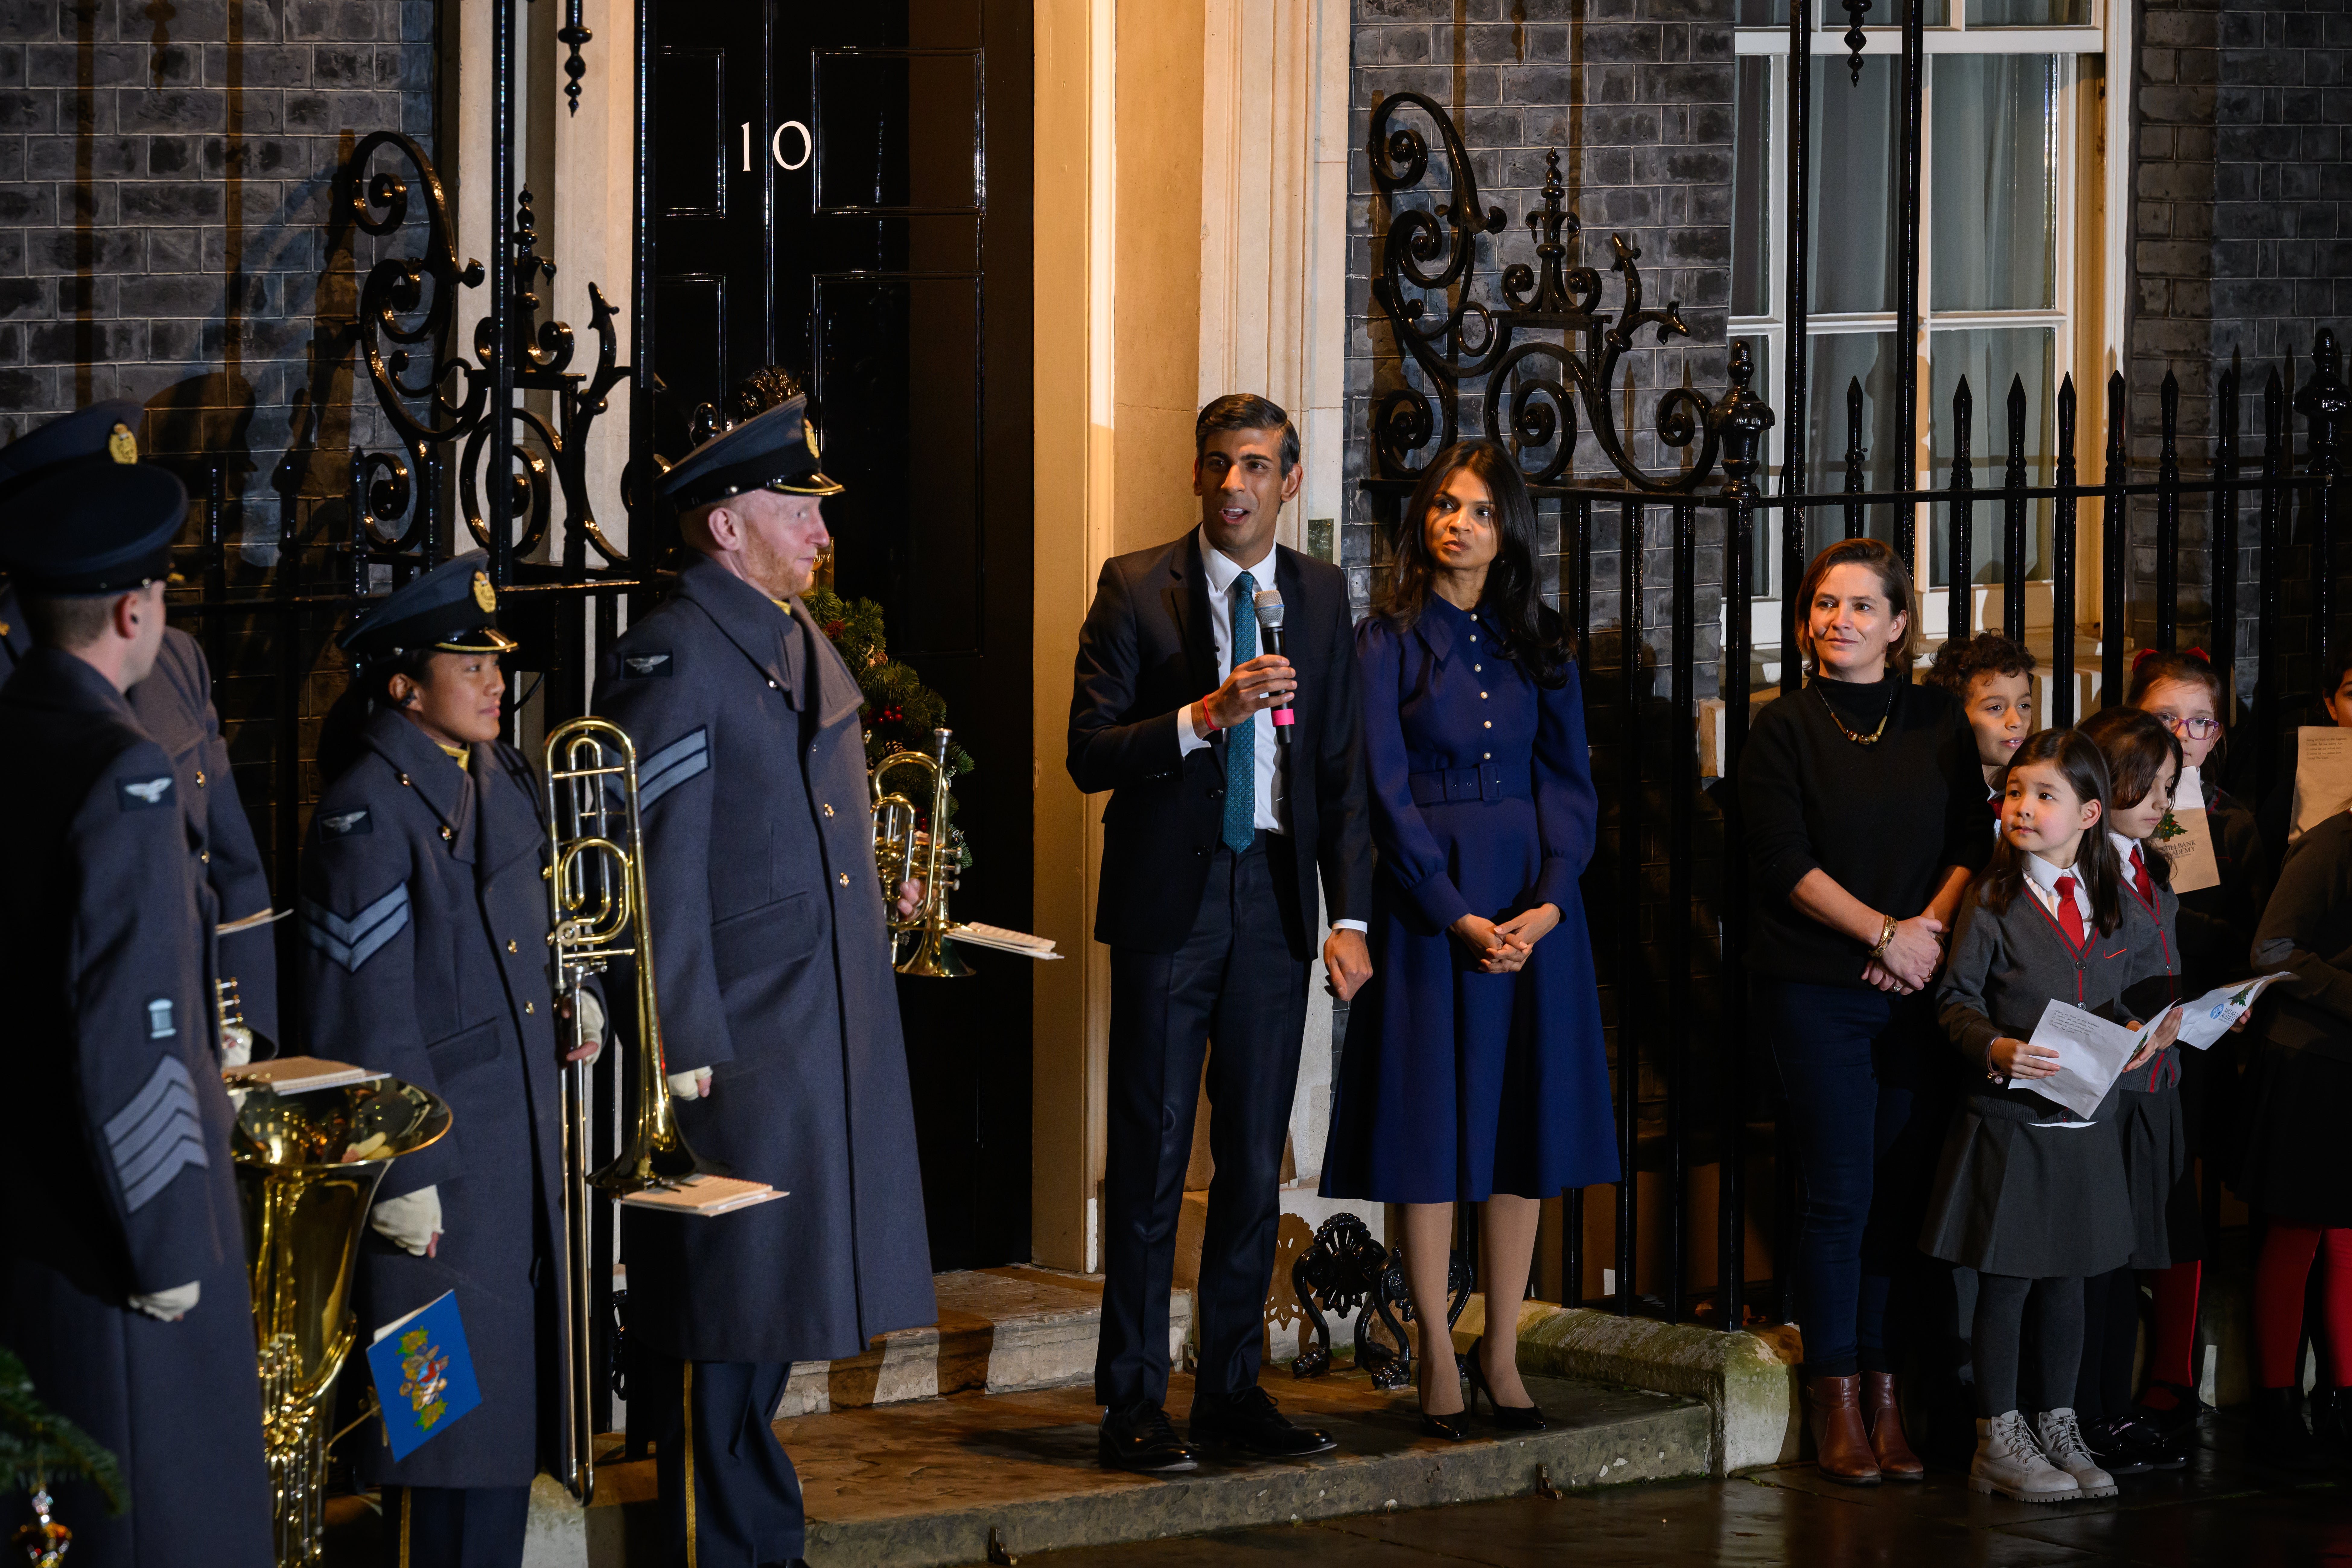 Prime minister Rishi Sunak and his wife Akshata Murthy look on as the Christmas tree lights are turned on outside No 10